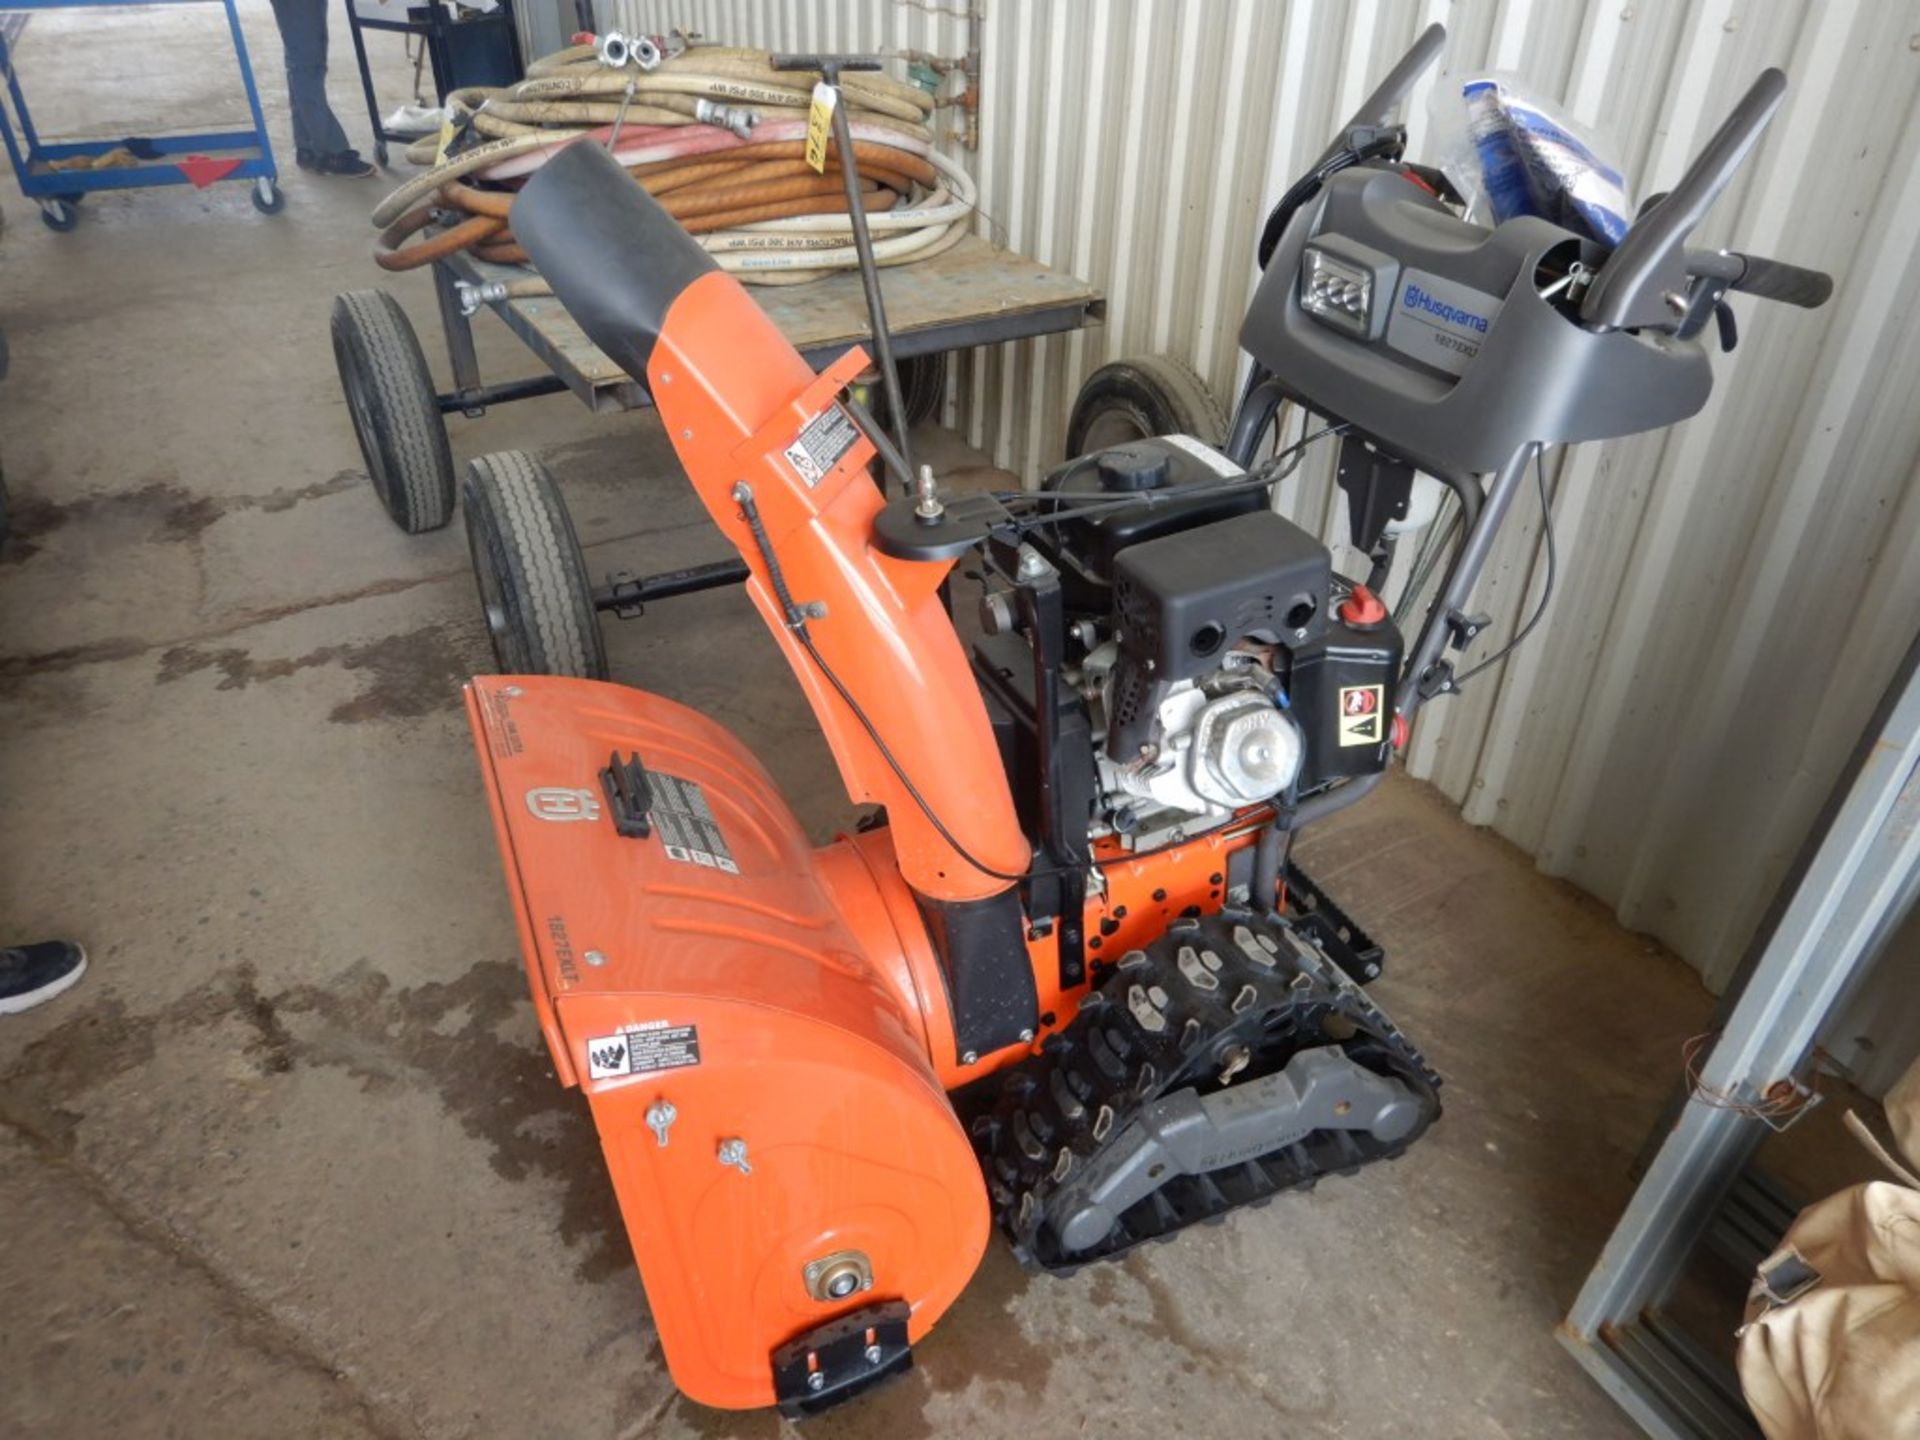 HUSQVARNA 1827EXLT 27" TRACK TYPE SNOW BLOWER W/ELECTRIC START (AS NEW) - Image 2 of 2